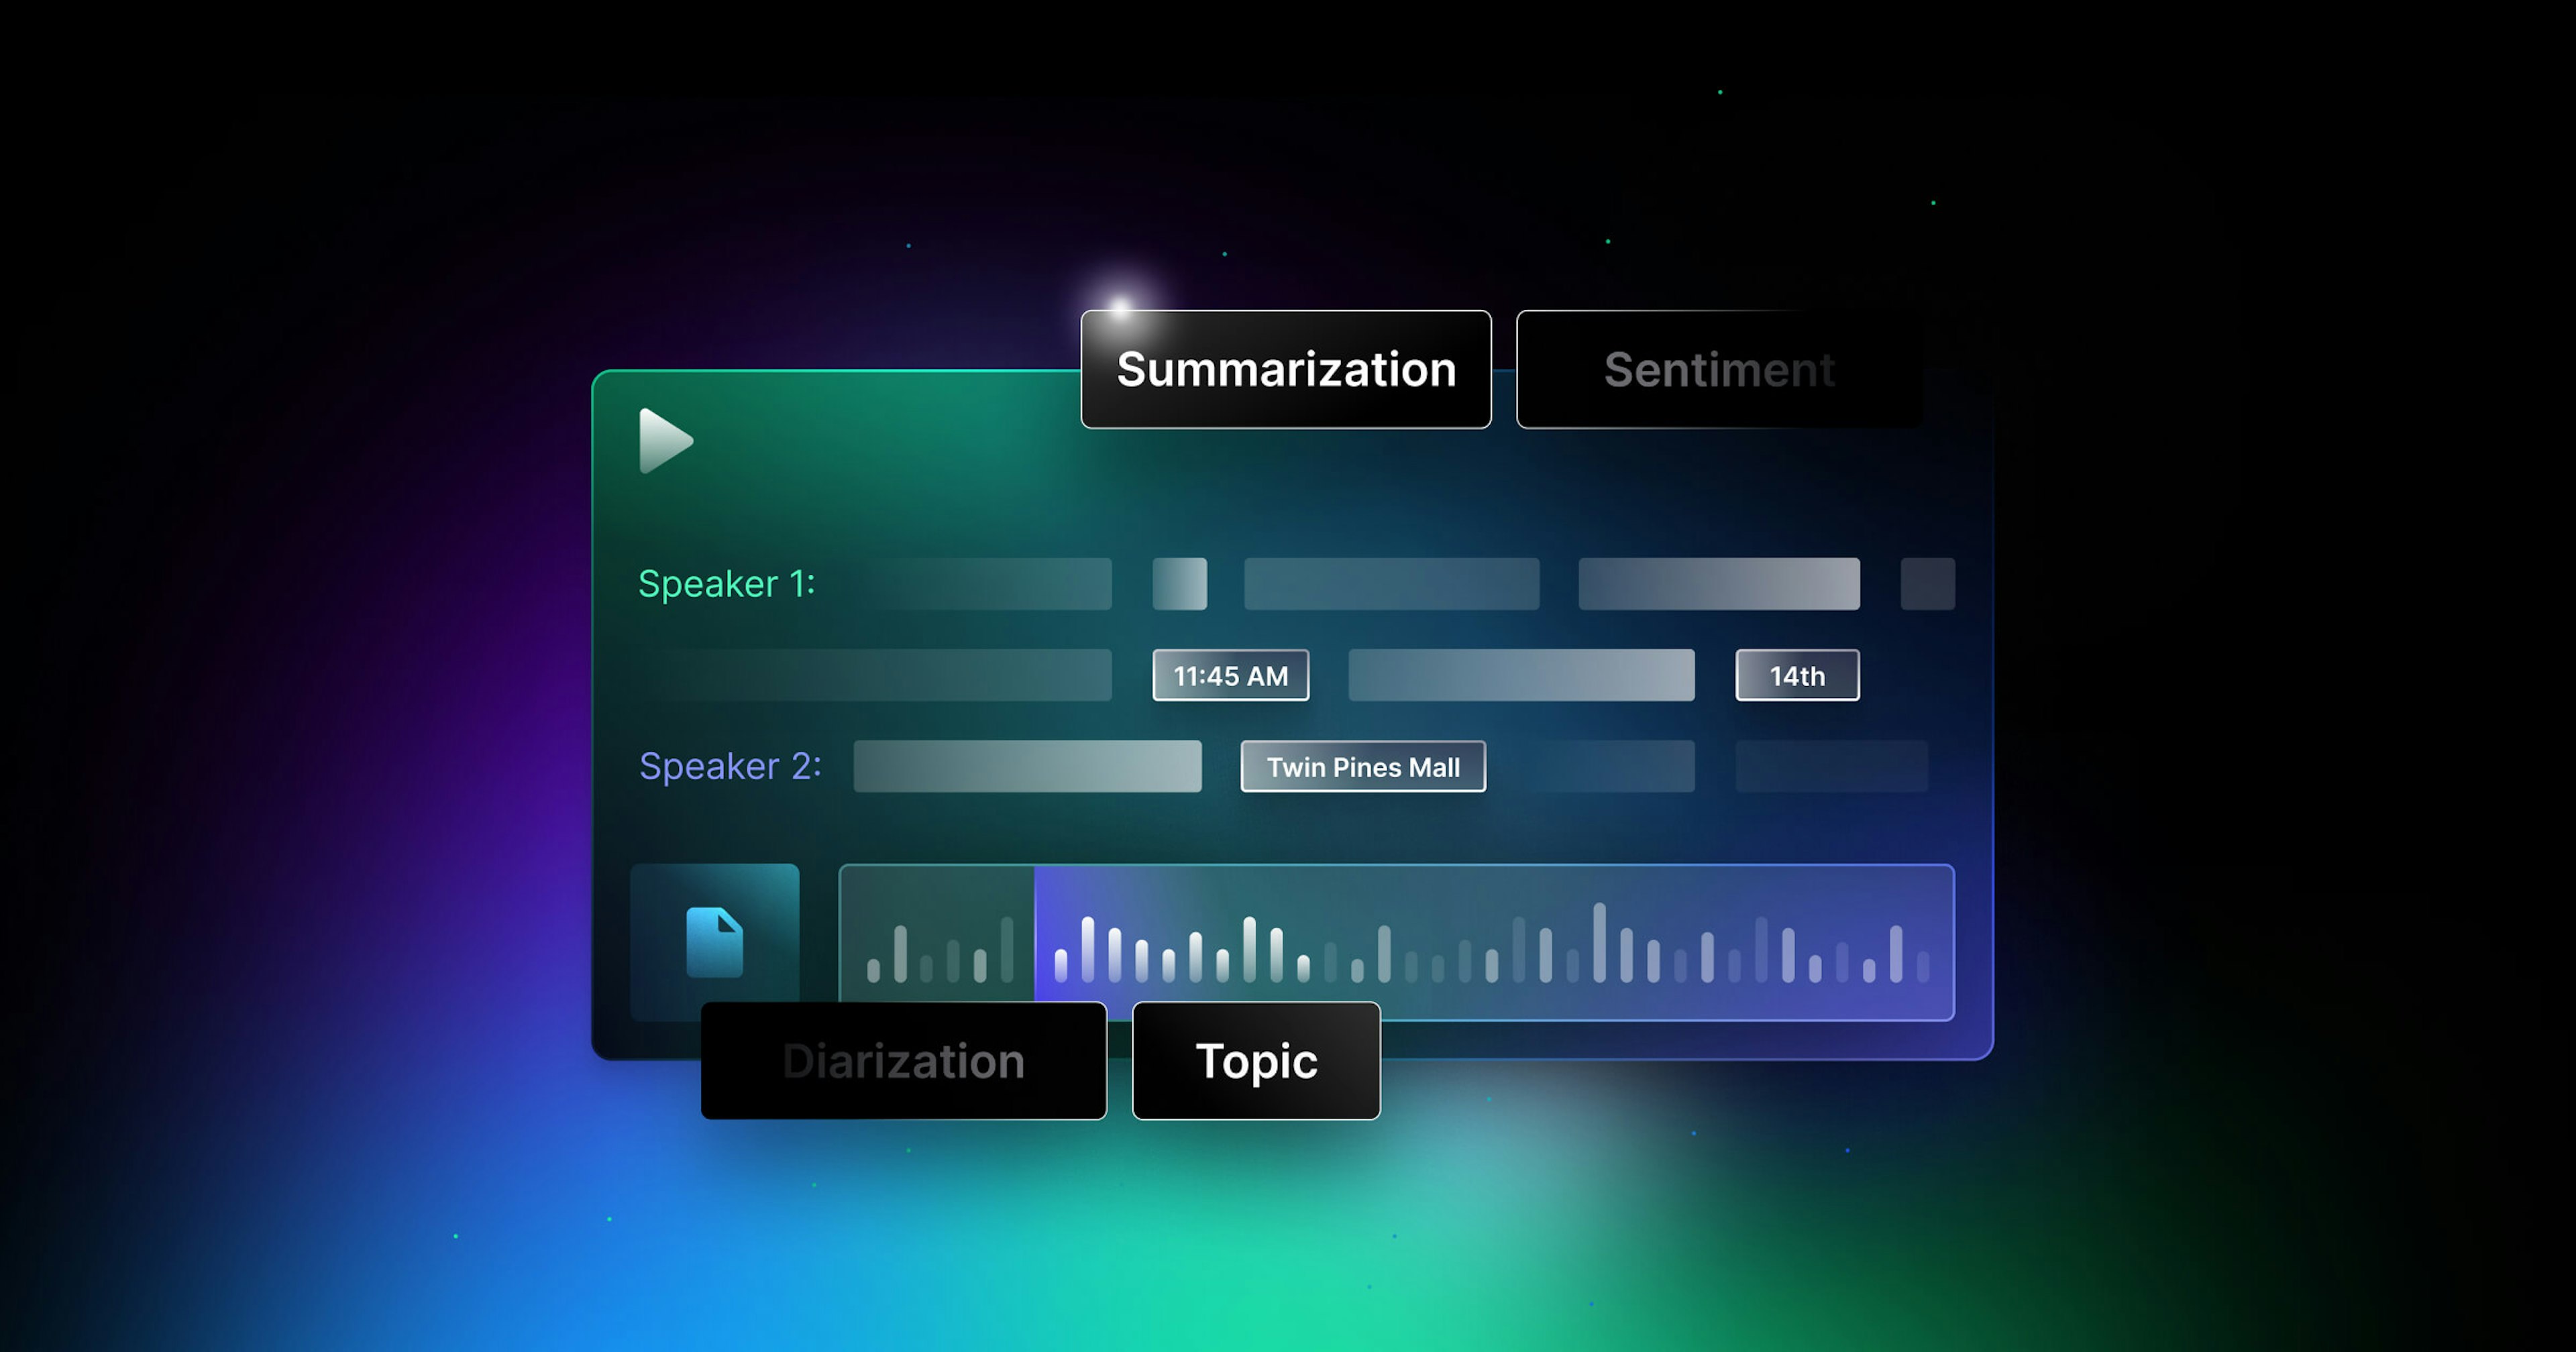 Introducing Speech Summarization Powered by Domain-Specific Language Models